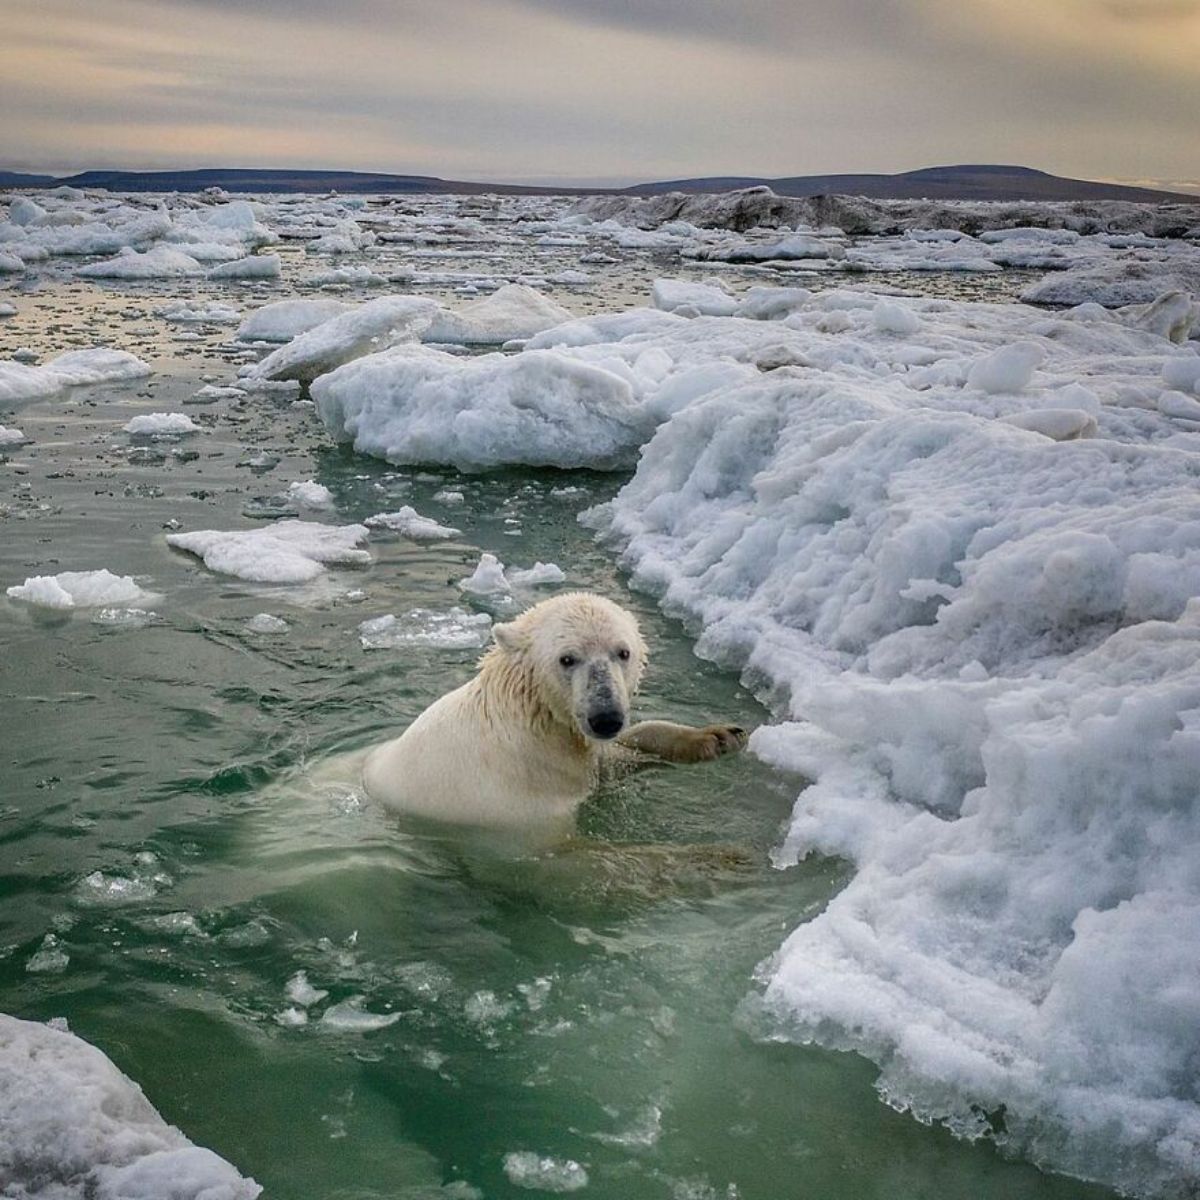 polar bear swimming in water next to floating ice